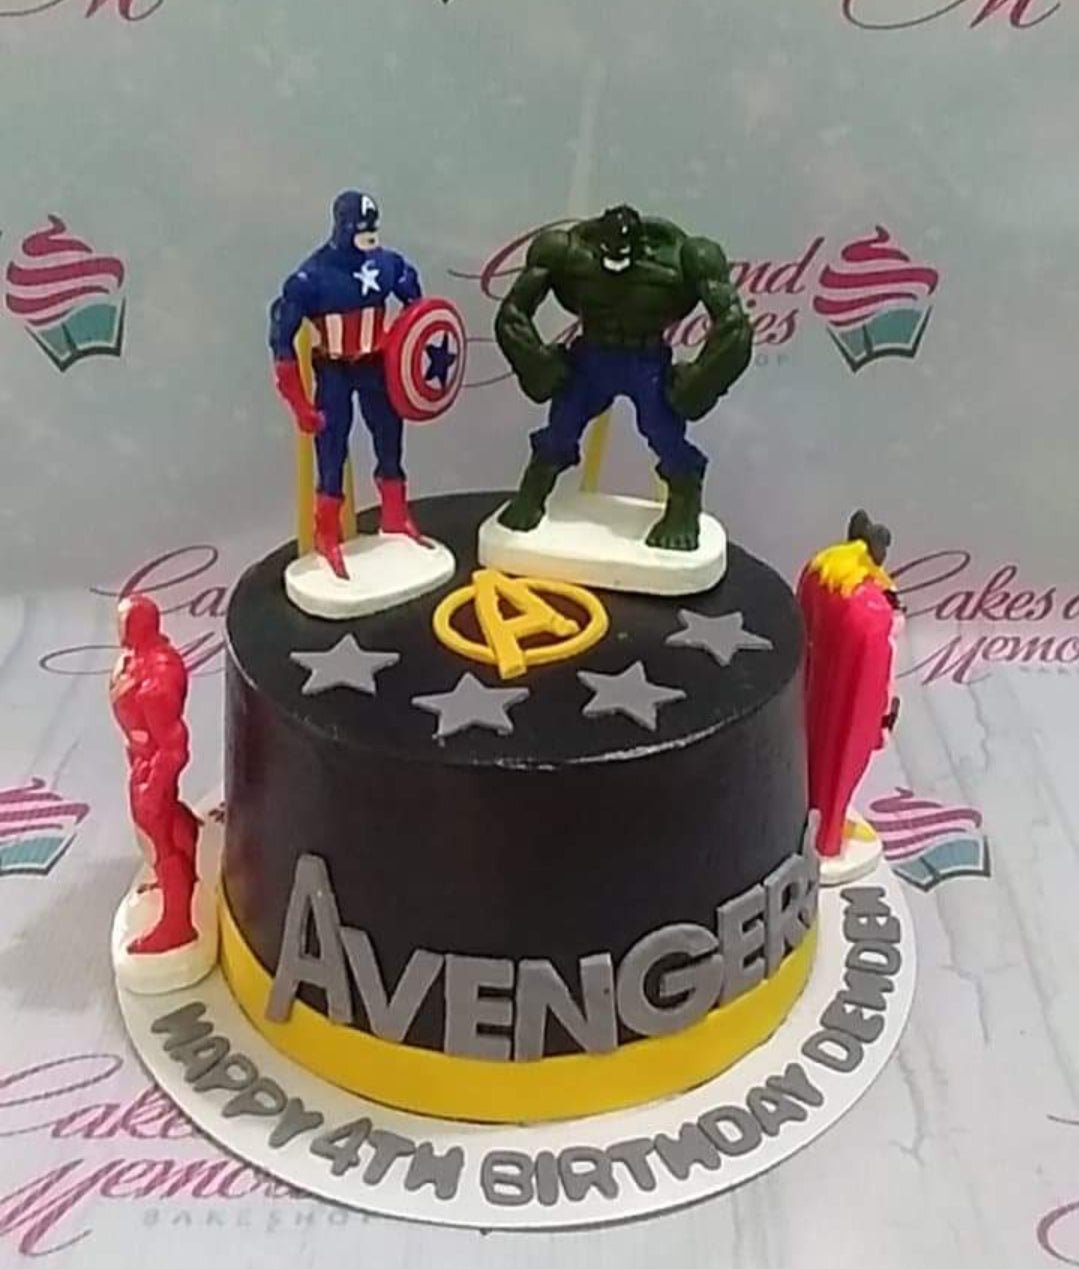 Asda - Do you know any little superheroes who'd LOVE one of these cakes?  You can find these tasty Avengers treats in our bakery aisle now:  http://bit.ly/1Mi4VVw | Facebook